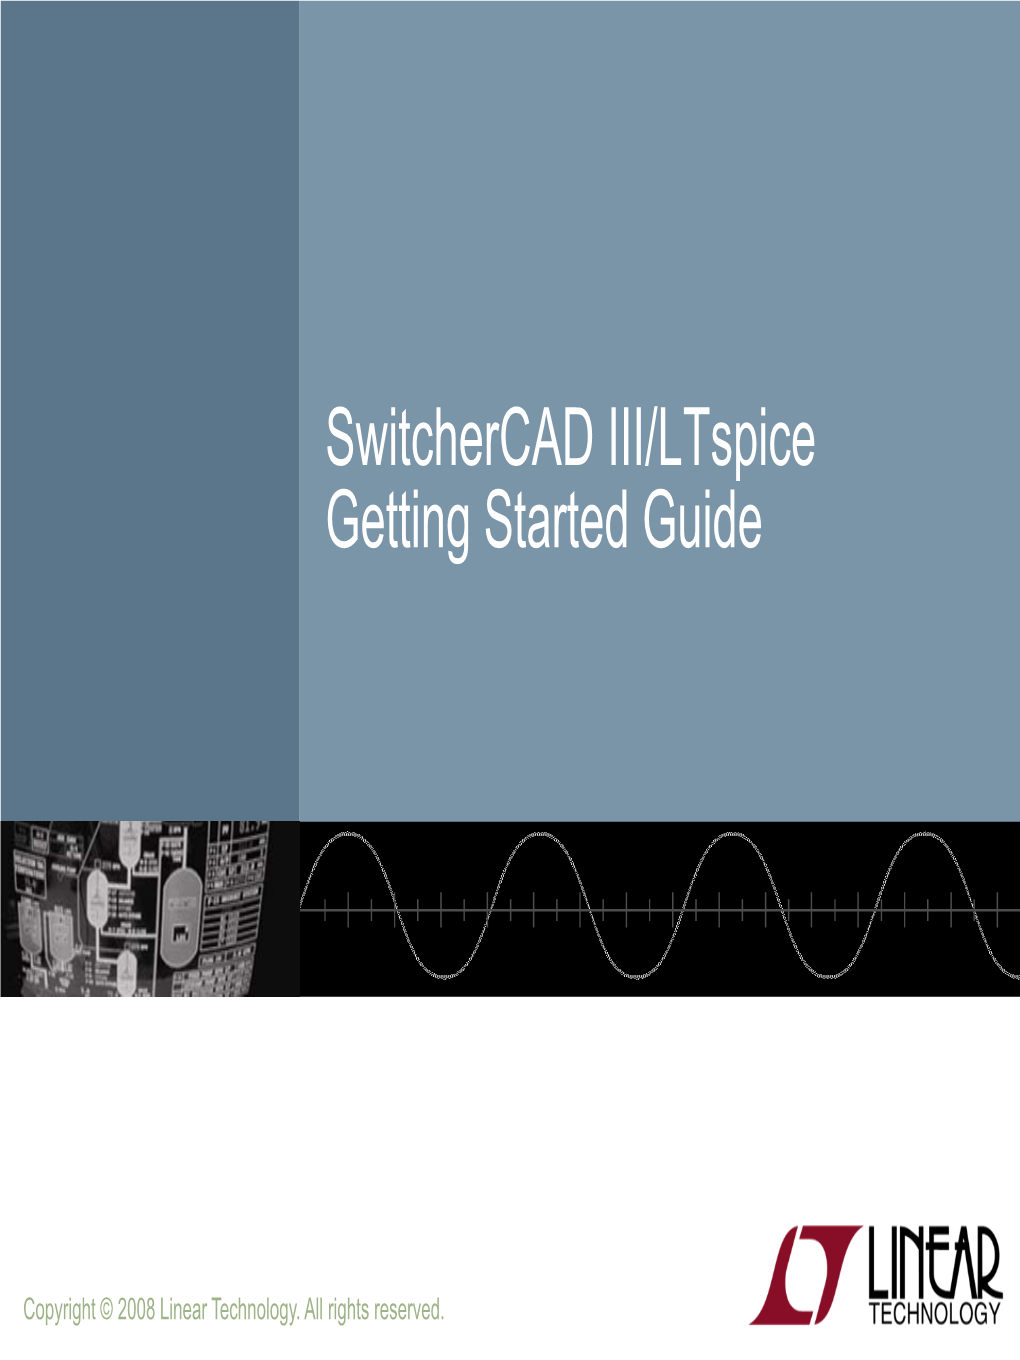 Switchercad III/Ltspice Getting Started Guide